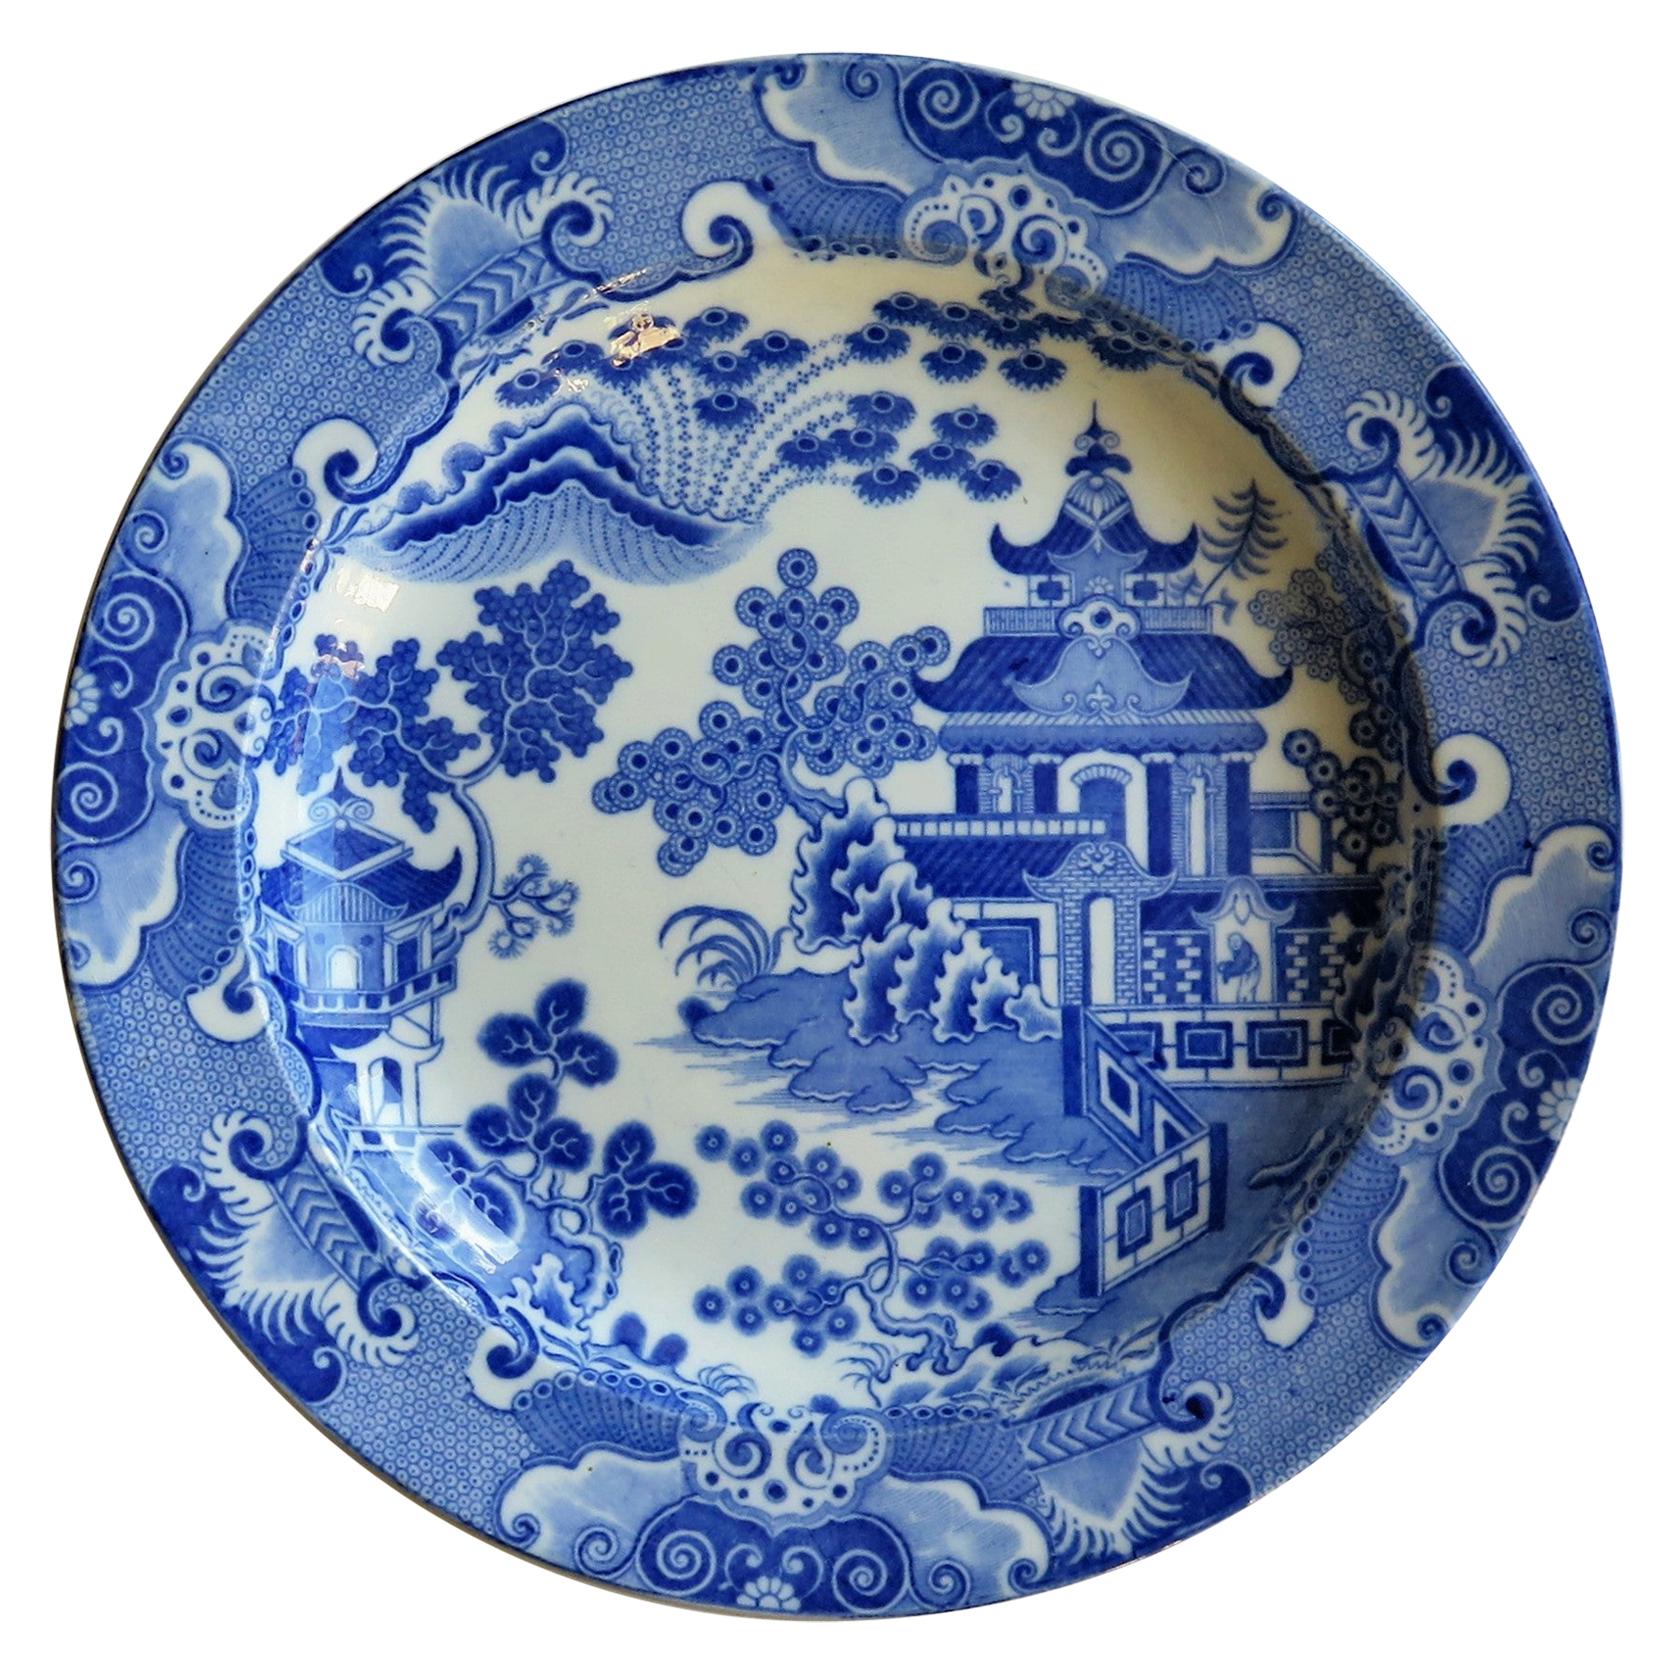 Fine Early Spode Pearlware Plate Blue and White Pagoda Pattern, circa 1805